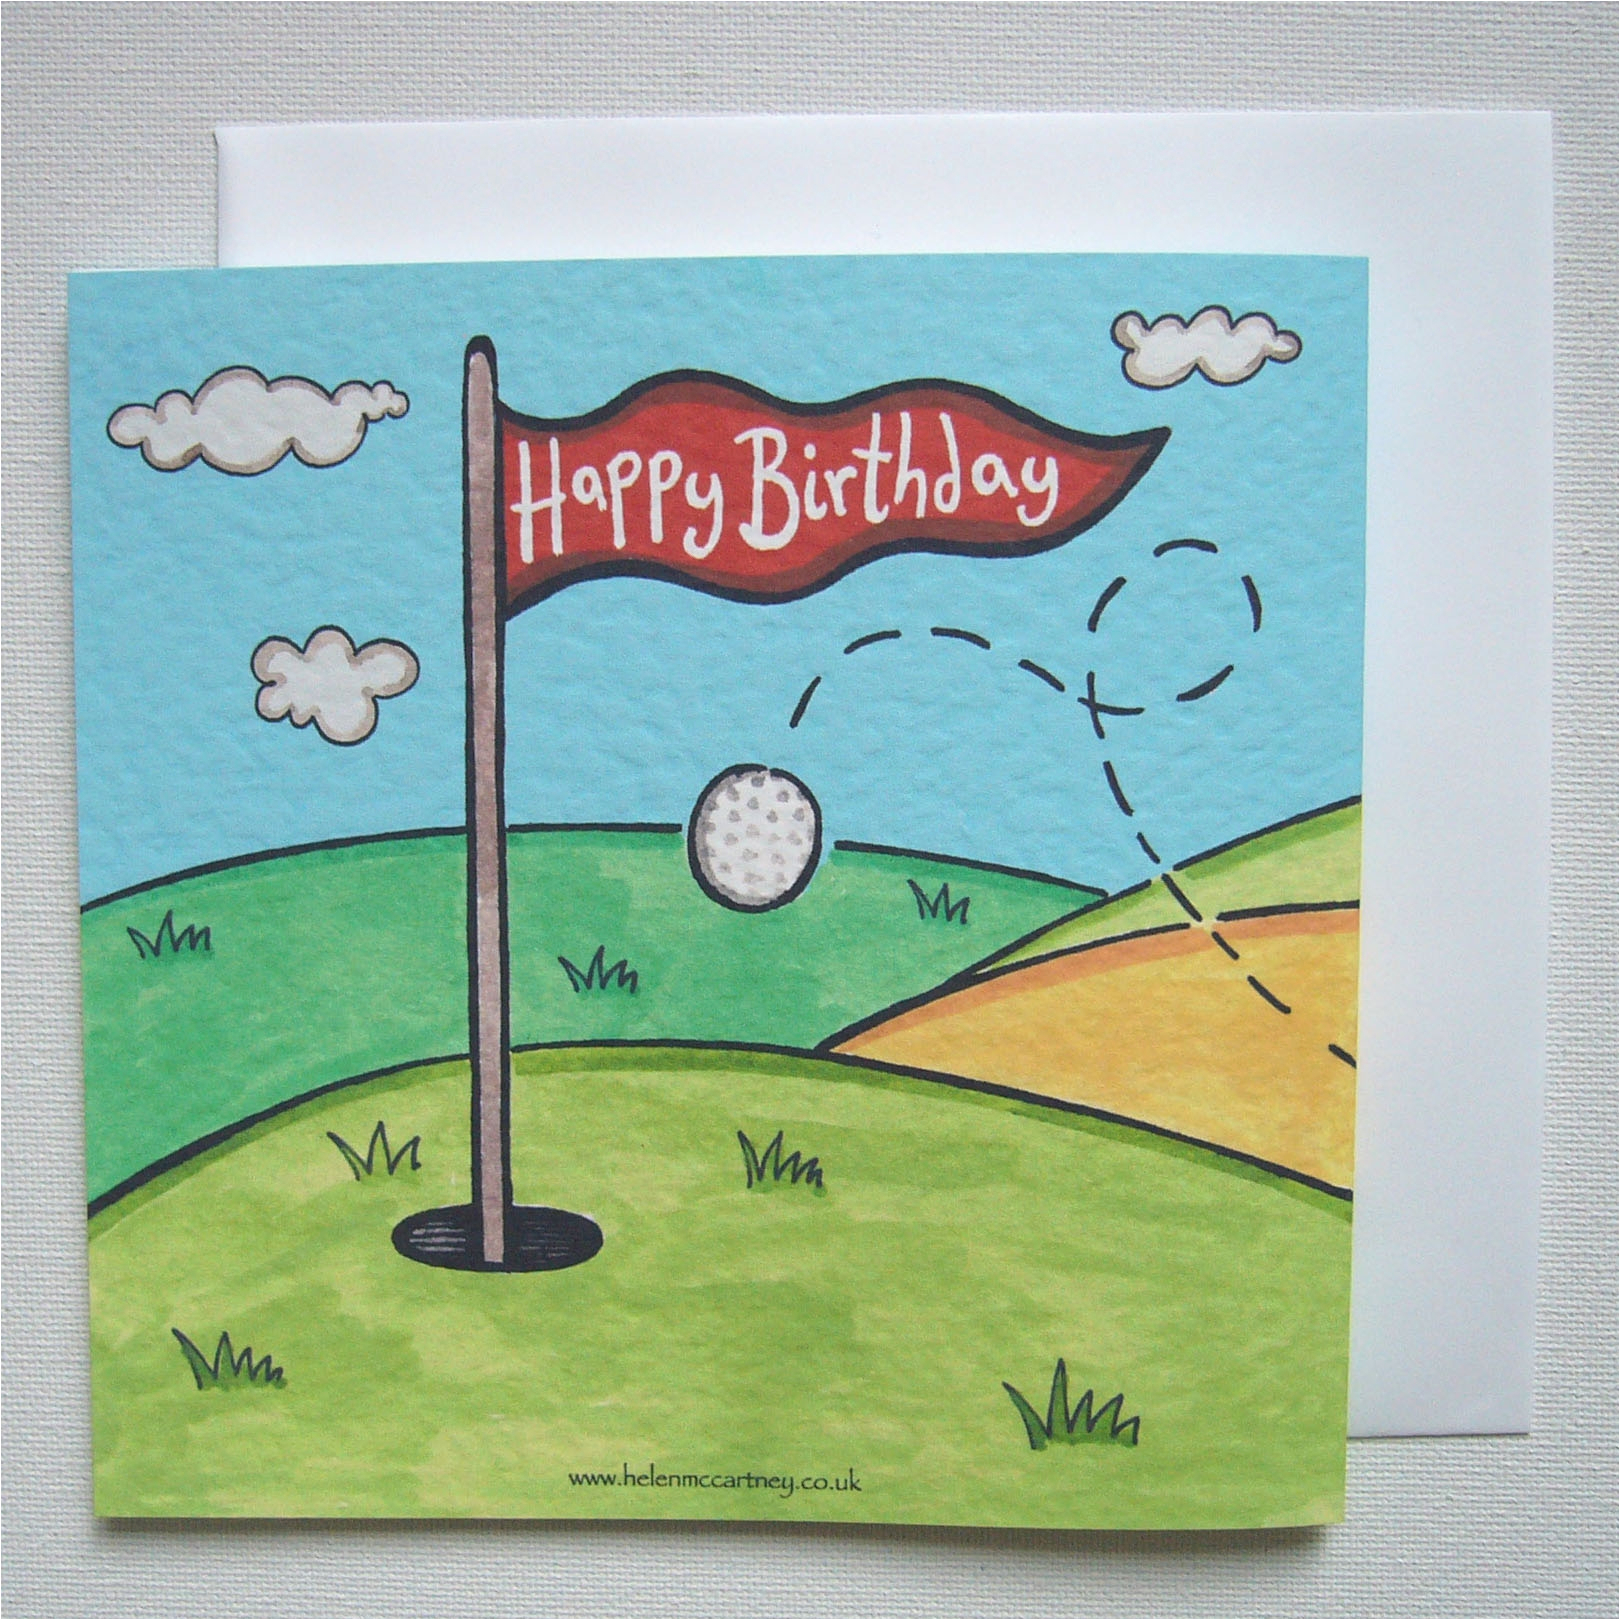 2. 15 happy birthday funny golf images selection happy. 